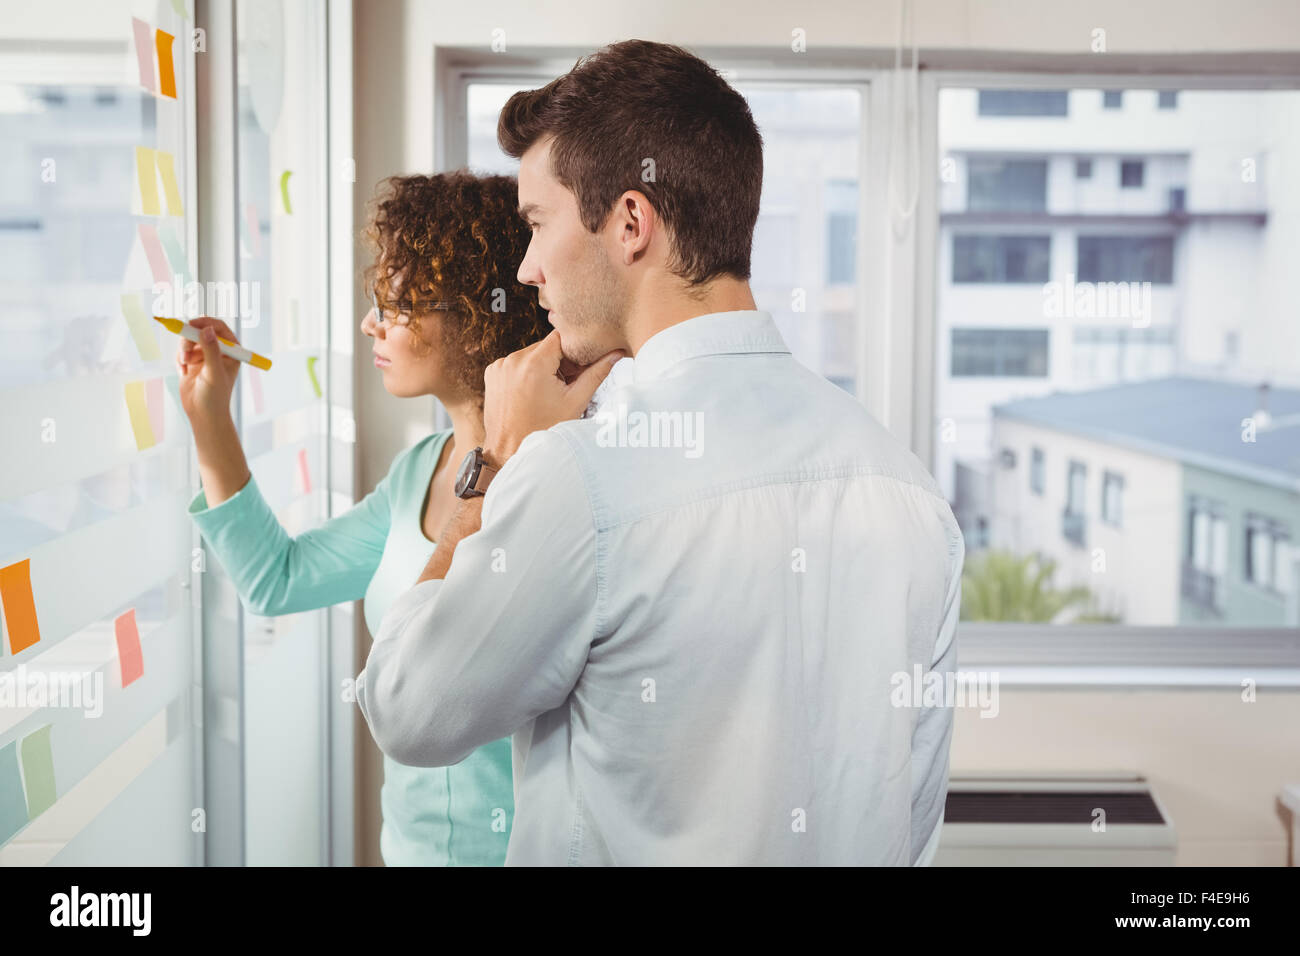 Businesswoman writing on adhesive note in creative office Stock Photo